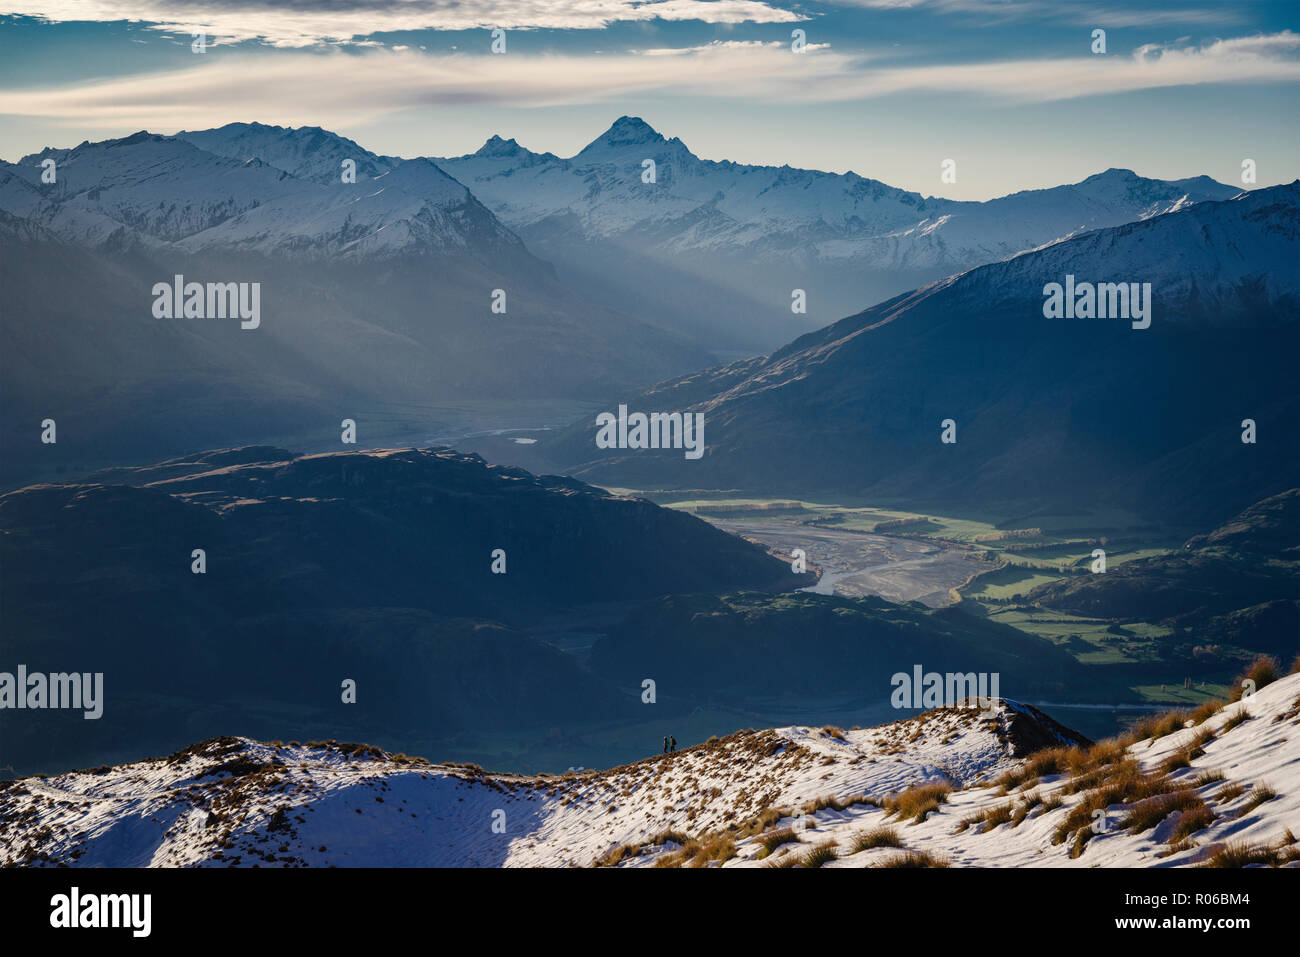 Hiking along the mountain ranges with a view of Mount Aspiring, Otago, South Island, New Zealand, Pacific Stock Photo